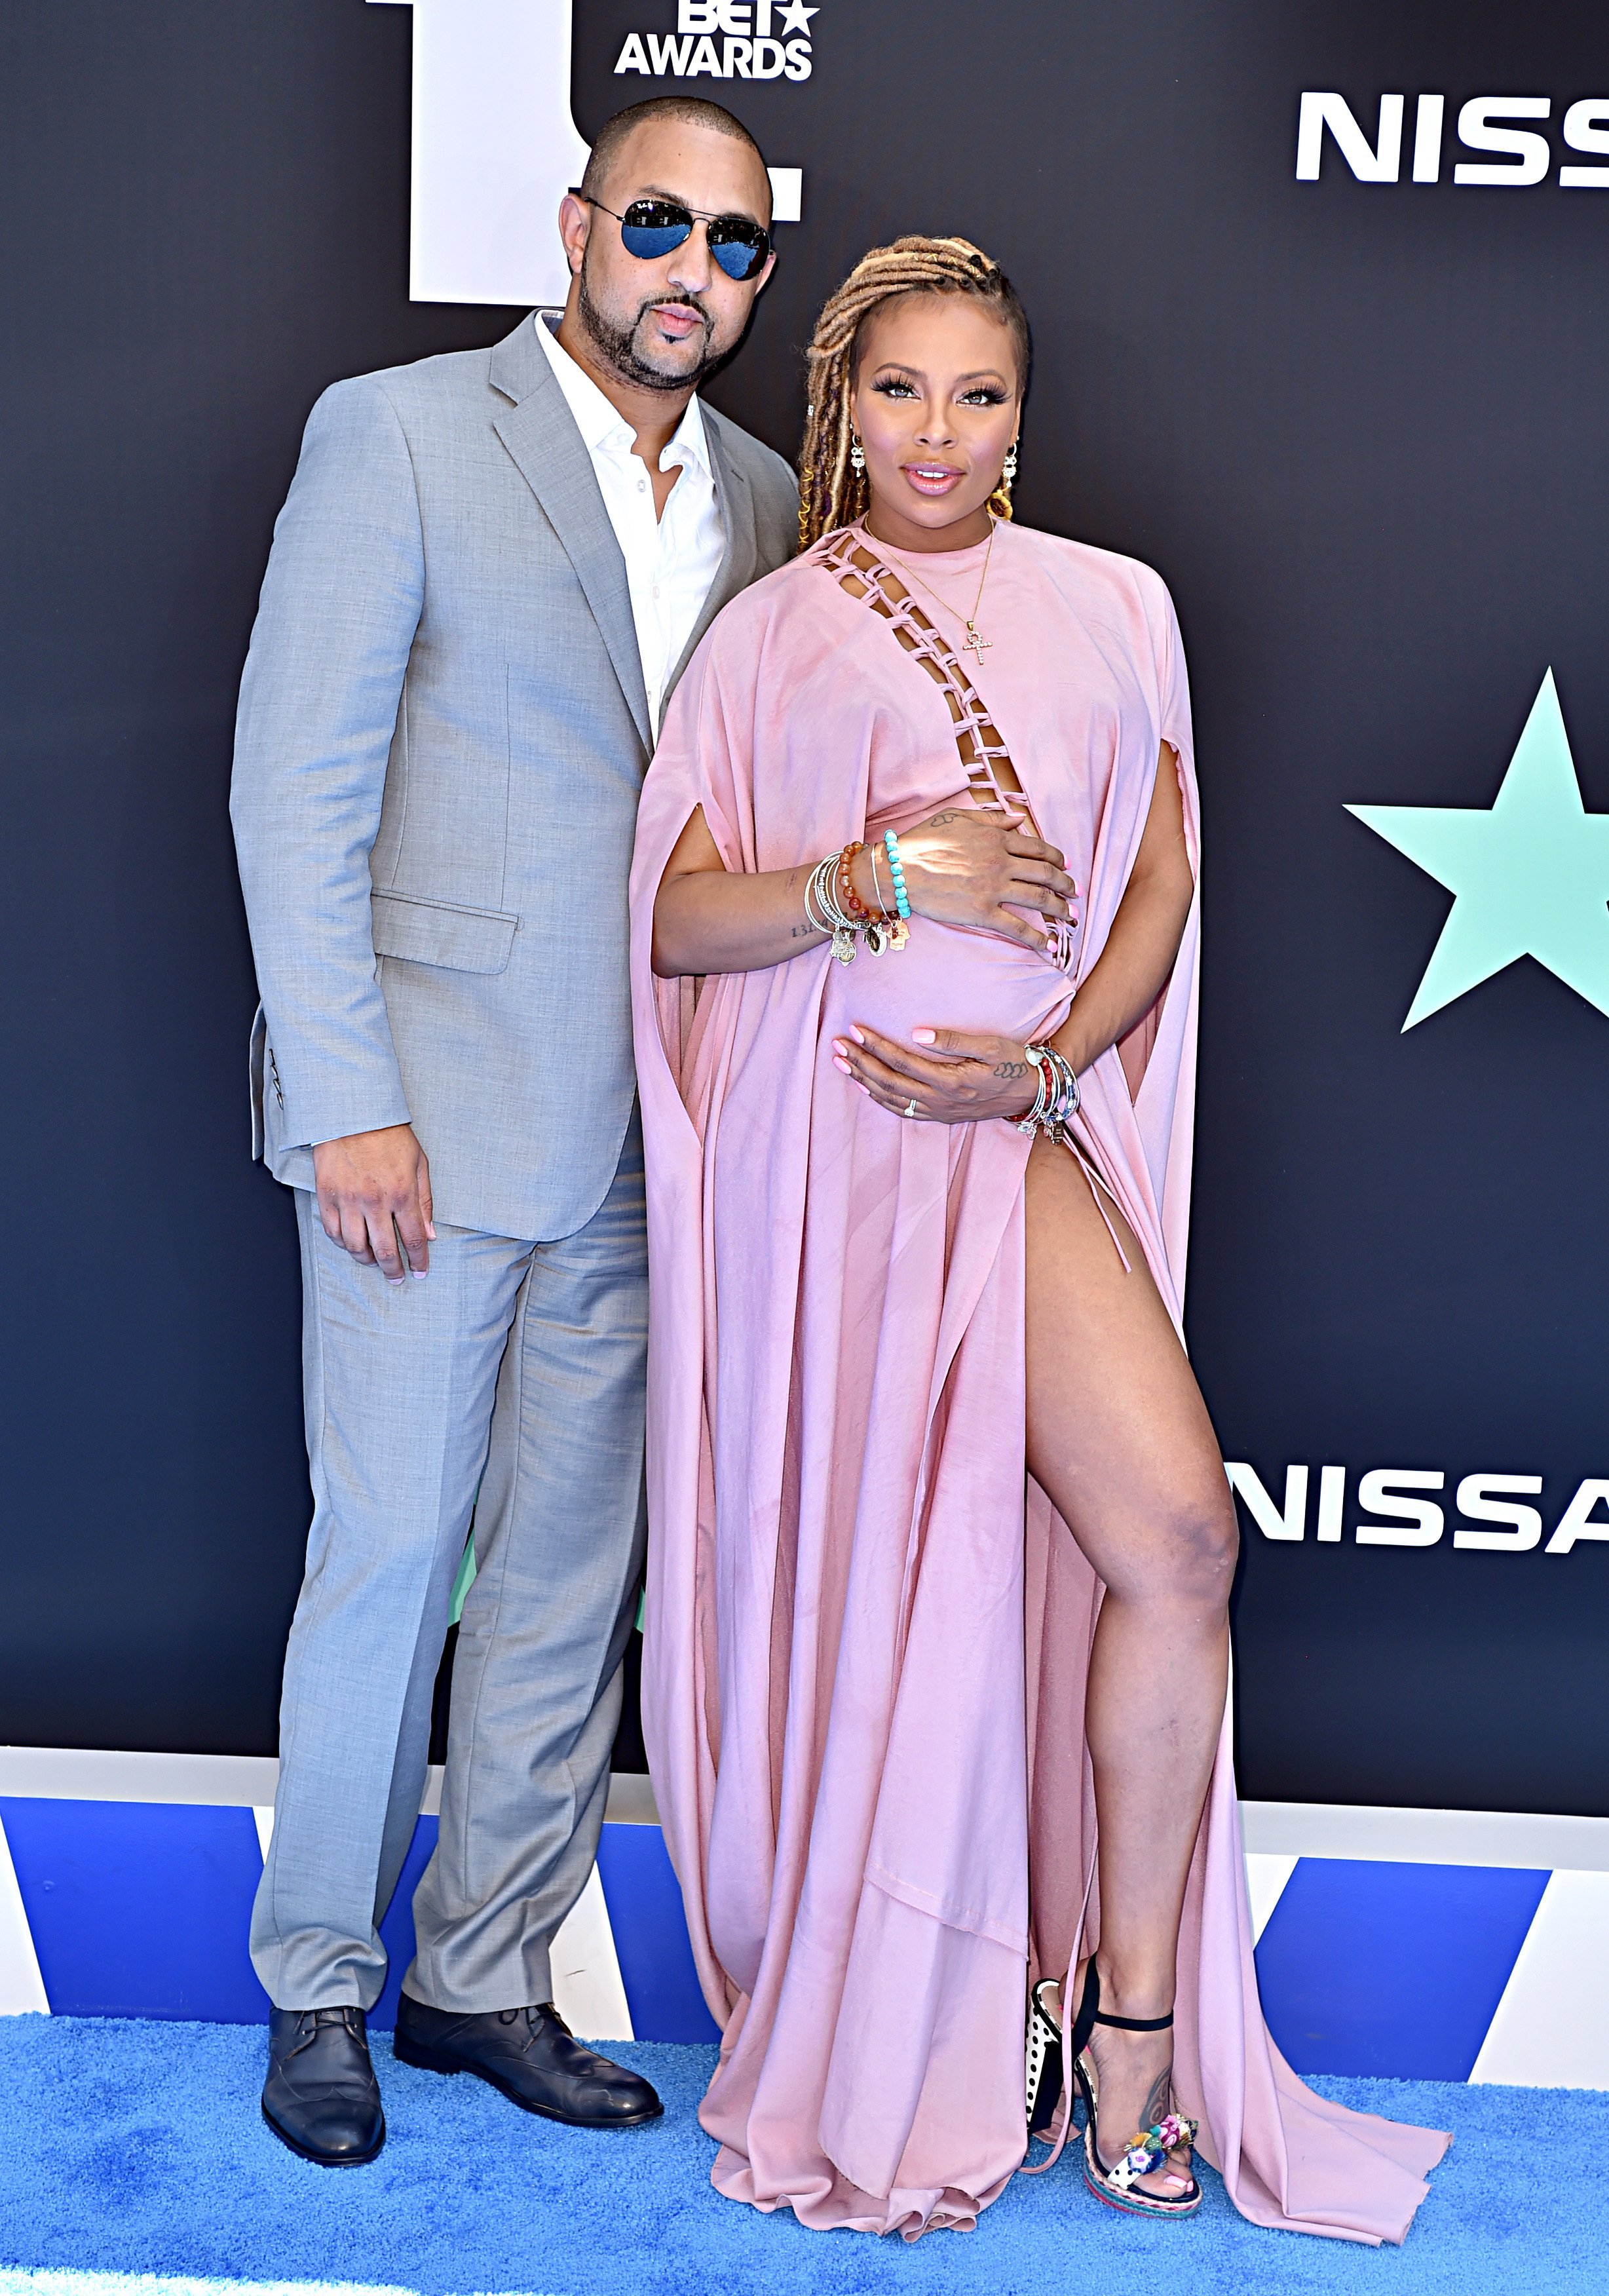 Eva Marcille and husband Michael Sterling attend the 2019 BET Awards | Photo: Getty images